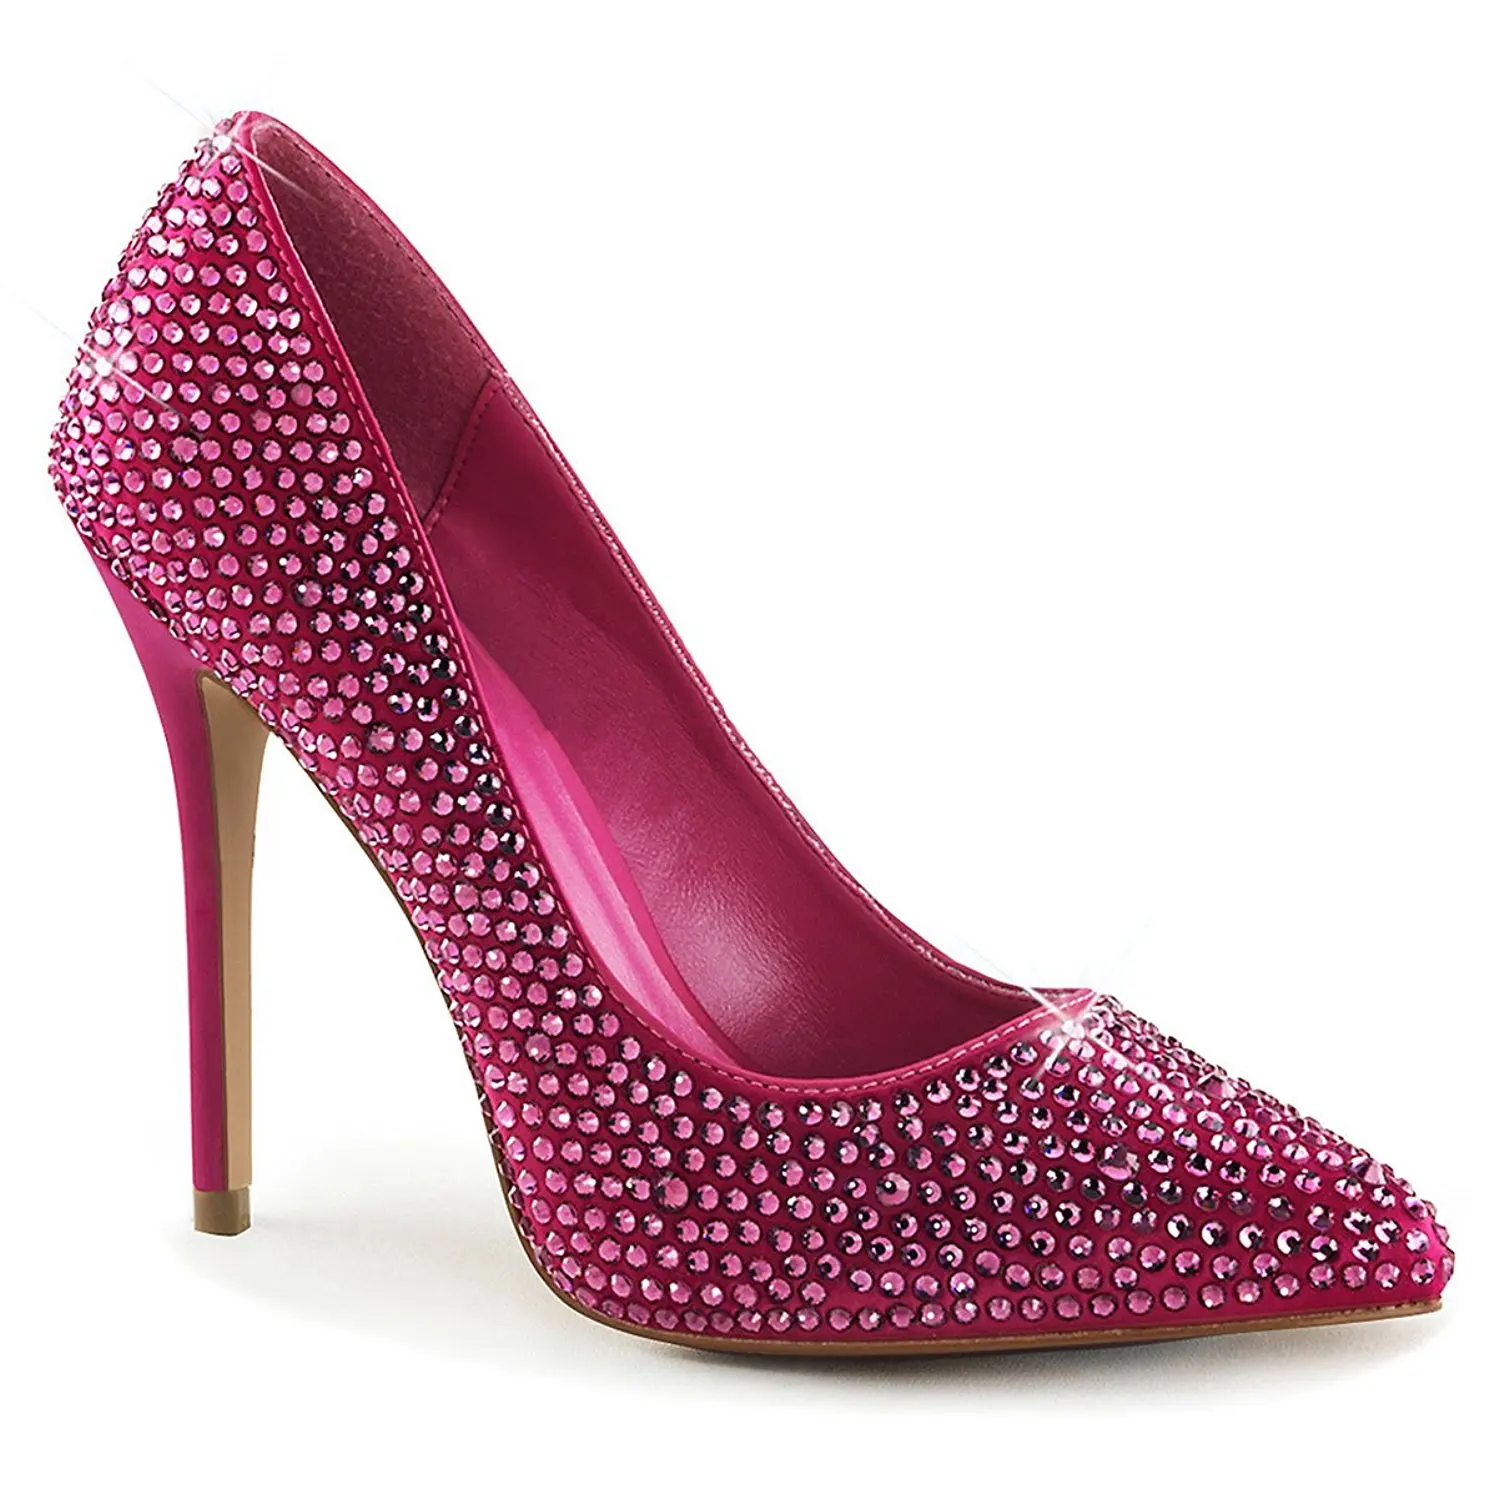 Cheap 3 Inch Pink Heels Find 3 Inch Pink Heels Deals On Line At 